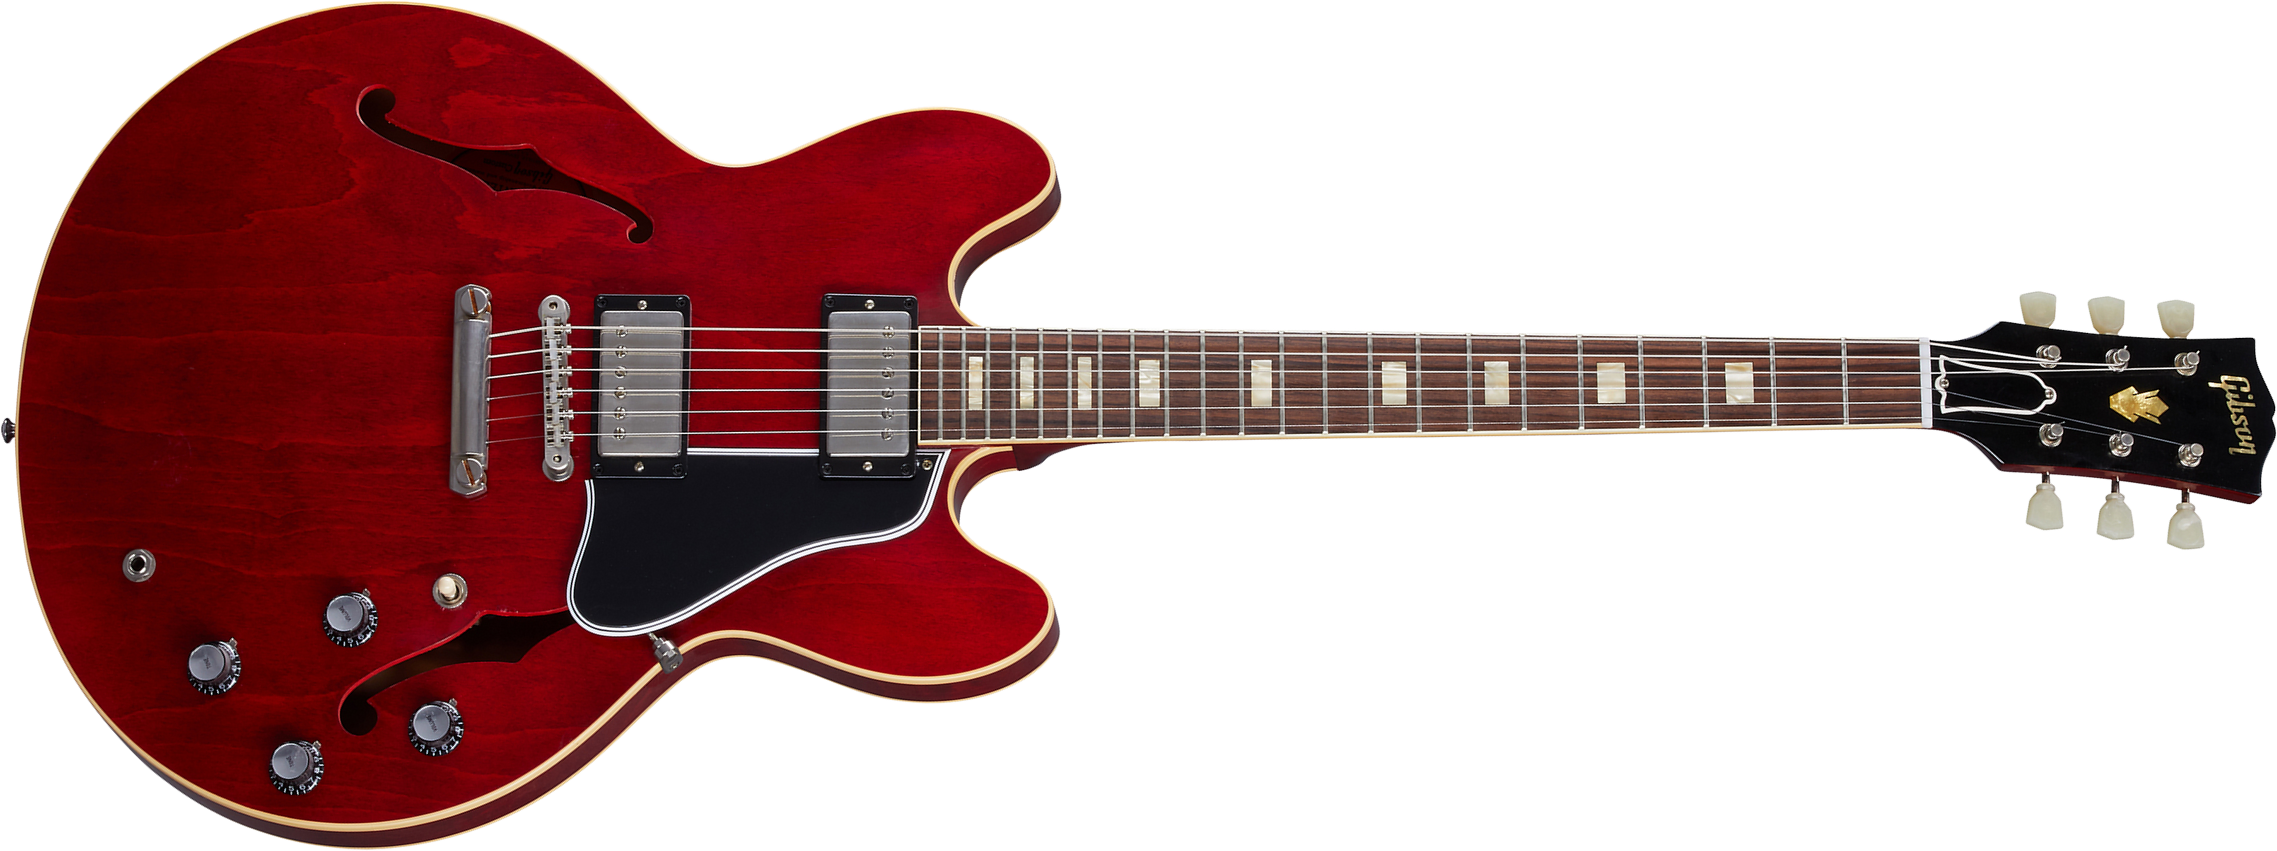 Gibson Custom Shop Murphy Lab Es-335 1964 Reissue 2h Ht Rw - Ultra Light Aged Sixties Cherry - Semi-hollow electric guitar - Main picture